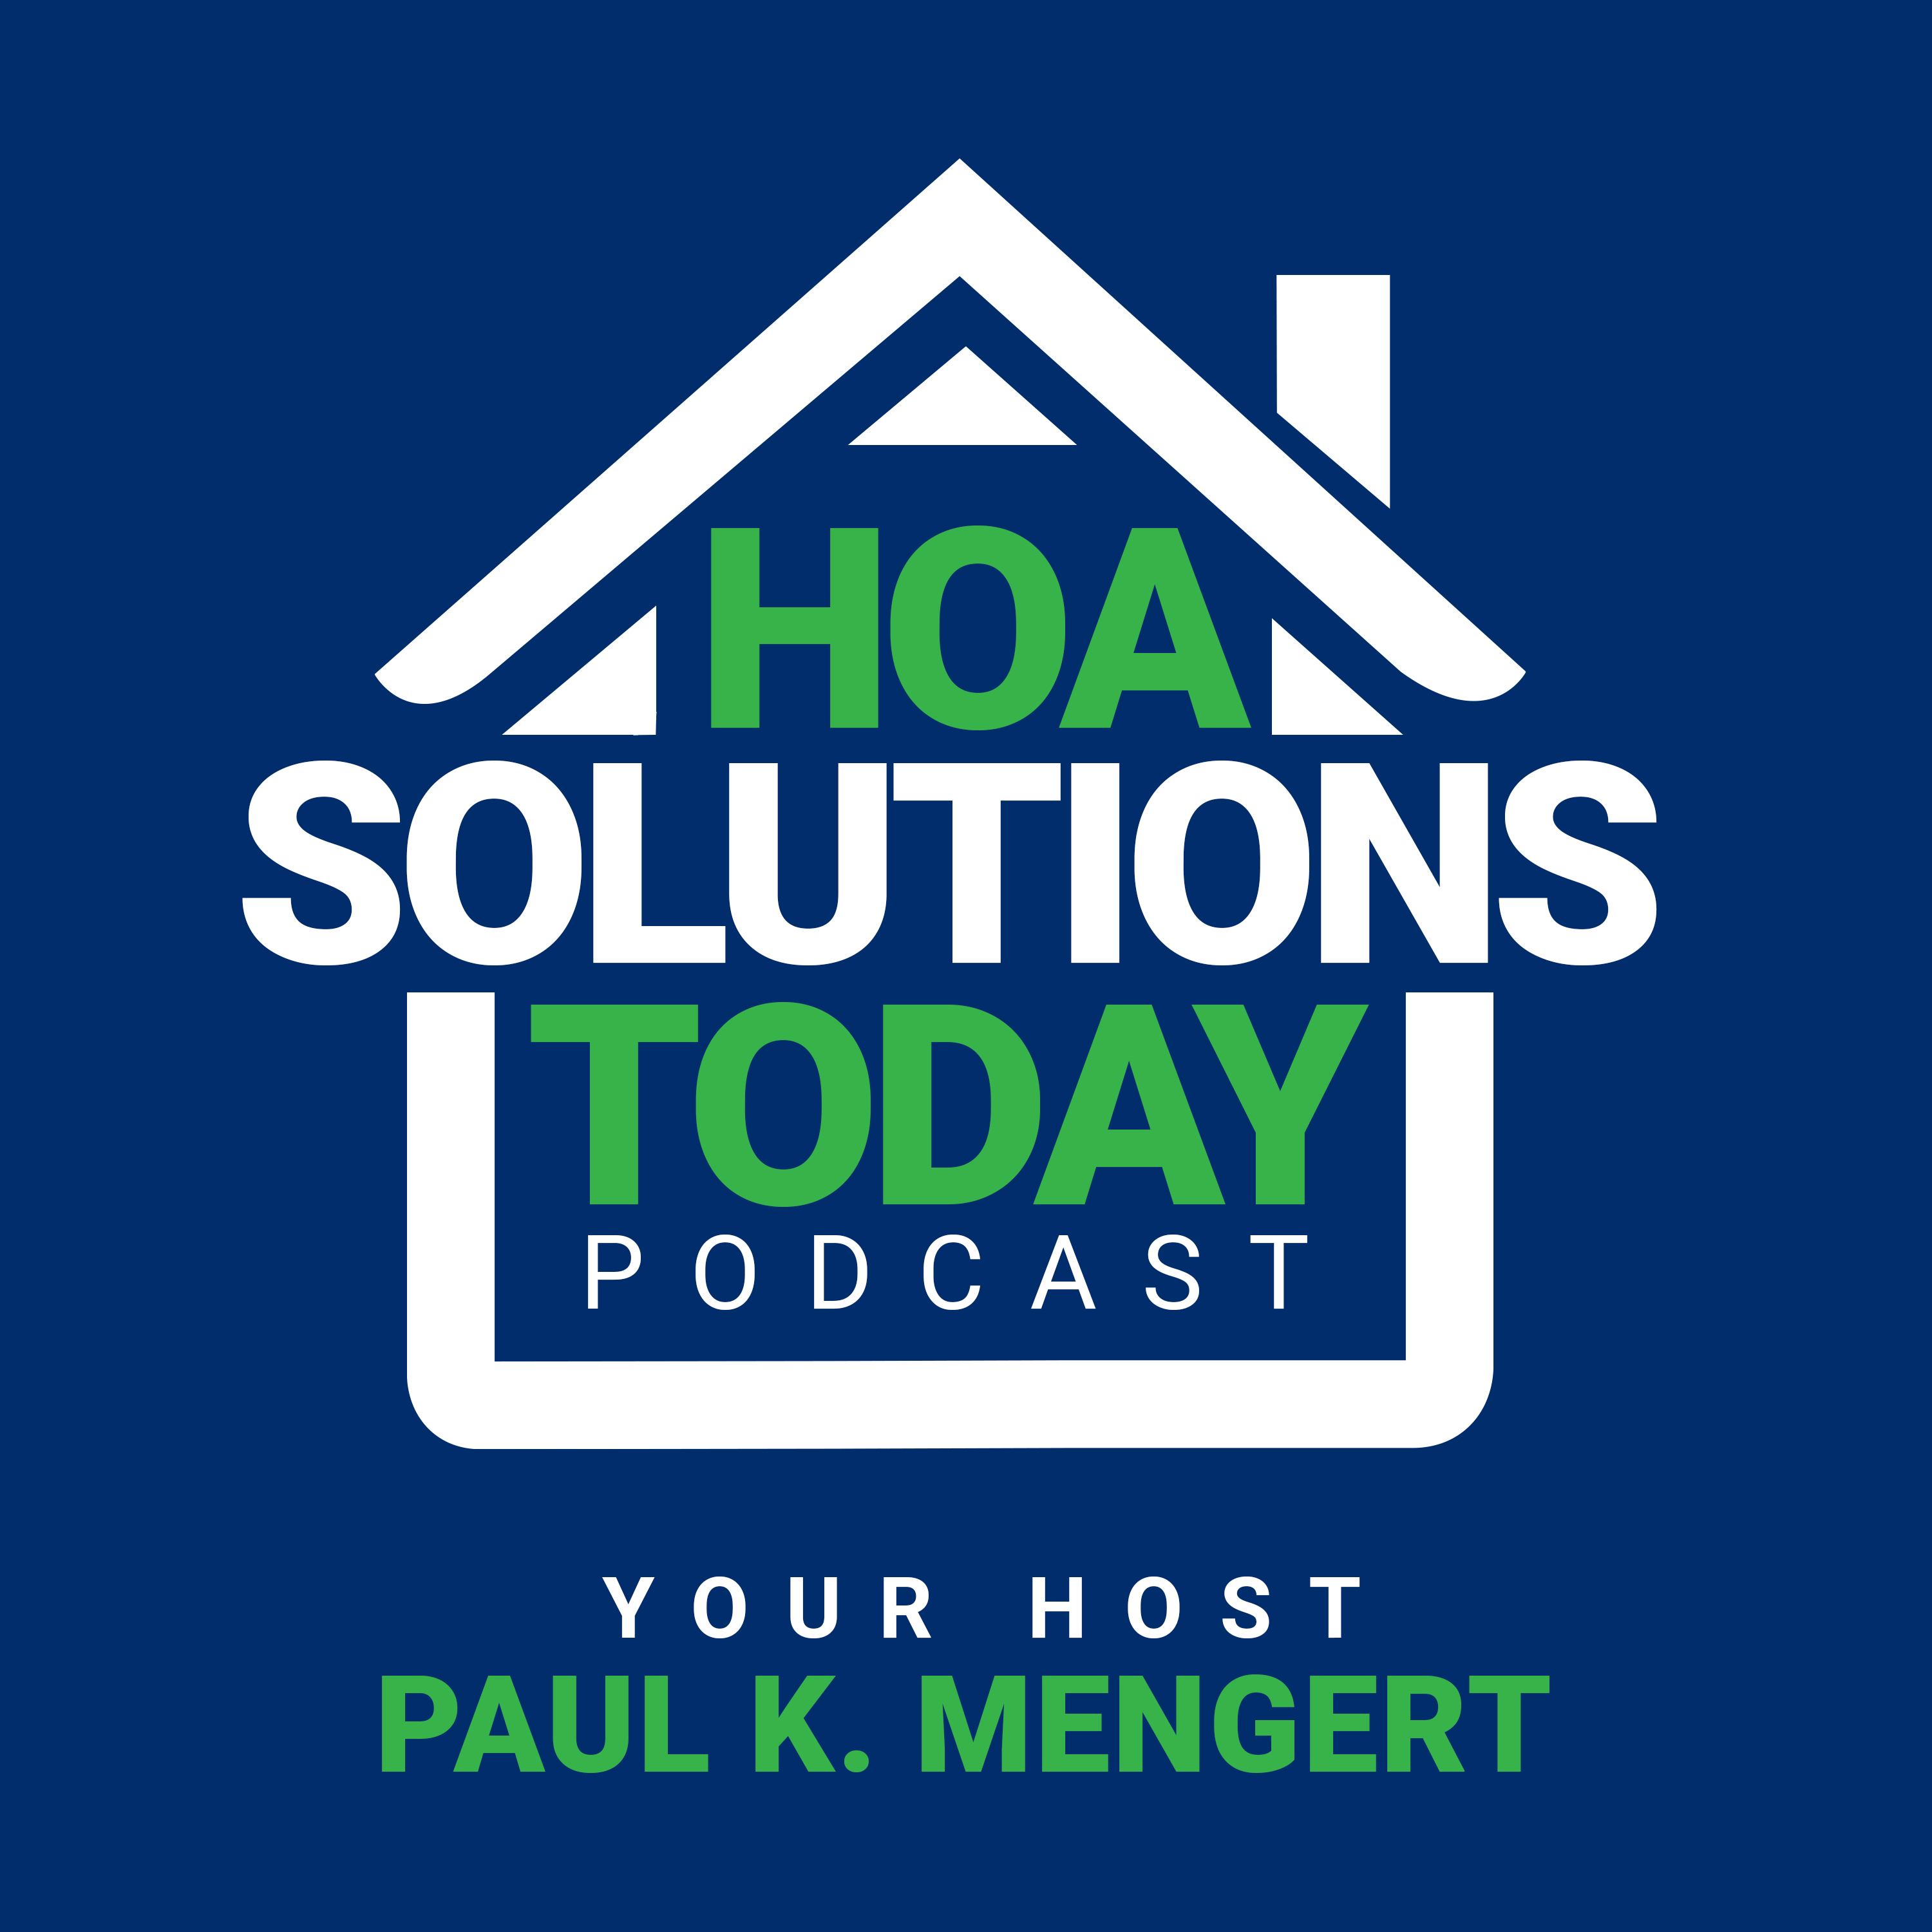 HOA Solutions Today: Remote Workers